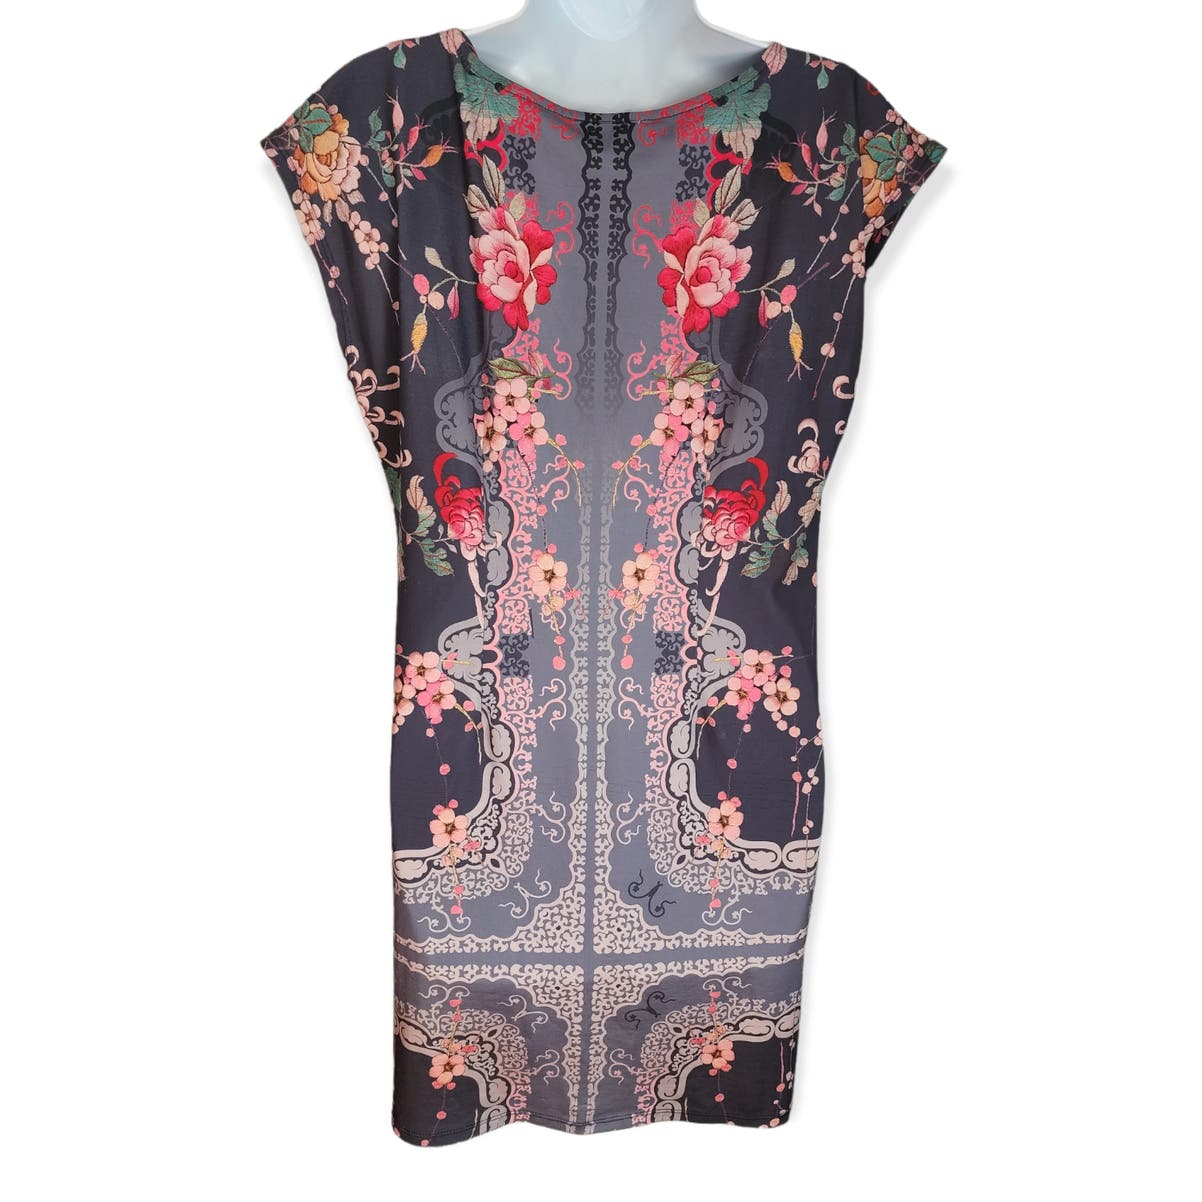 Johnny Was Floral Bodycon Scoop Neck Dress size small